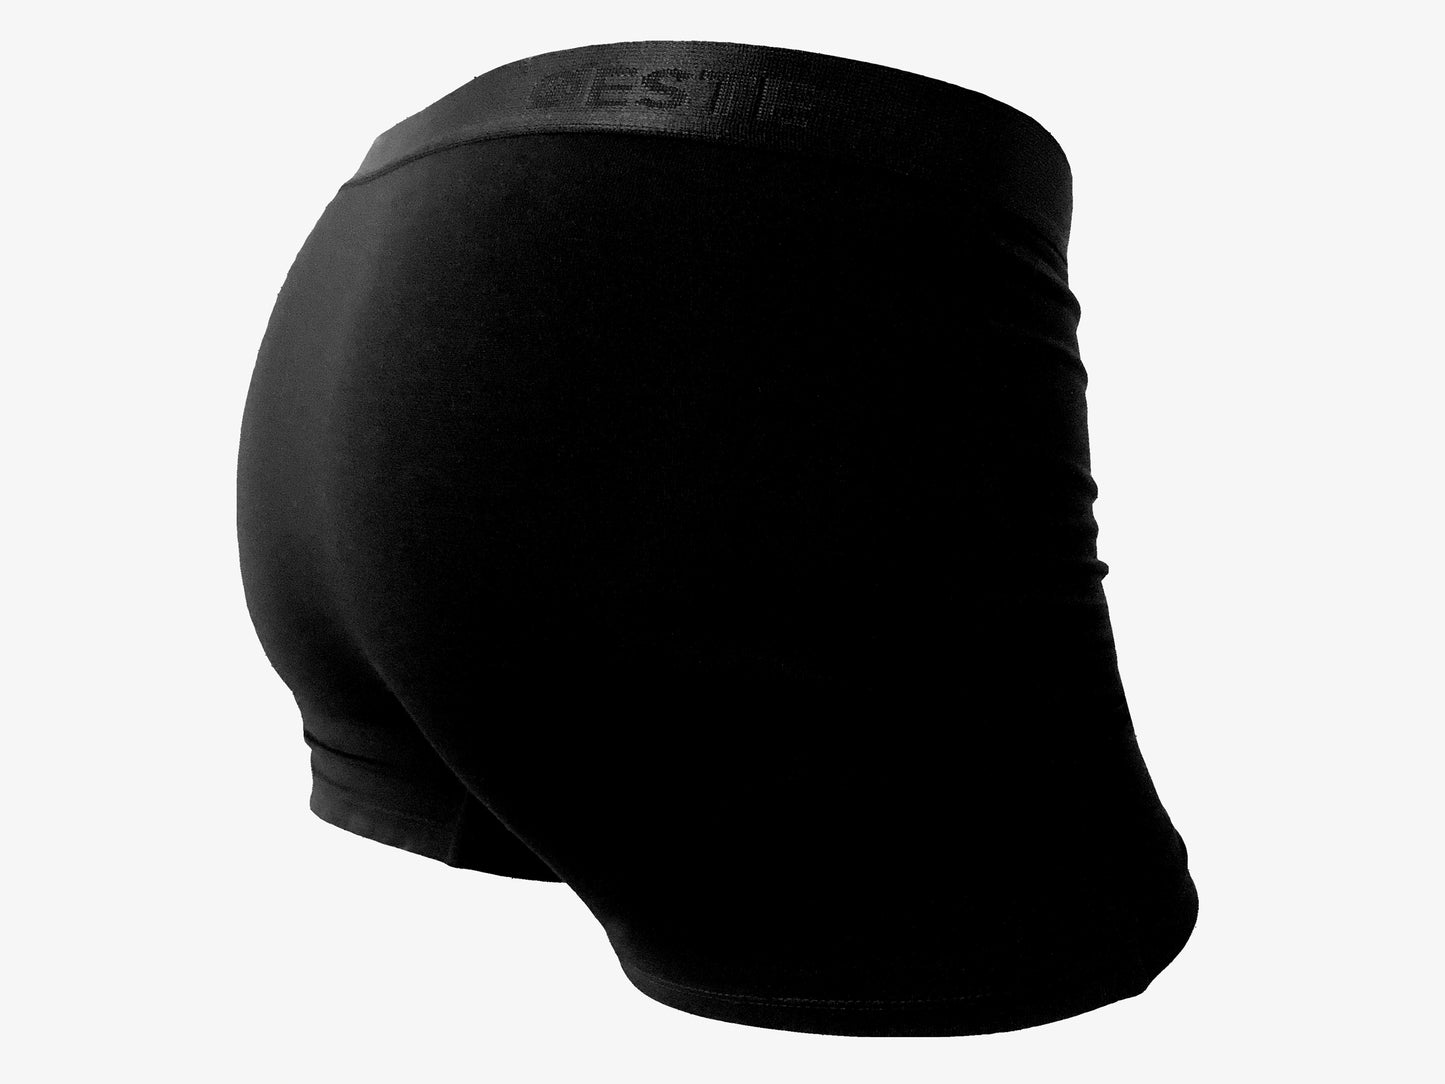 Load image into Gallery viewer, Triple Lyocell Boxer Brief - Black
